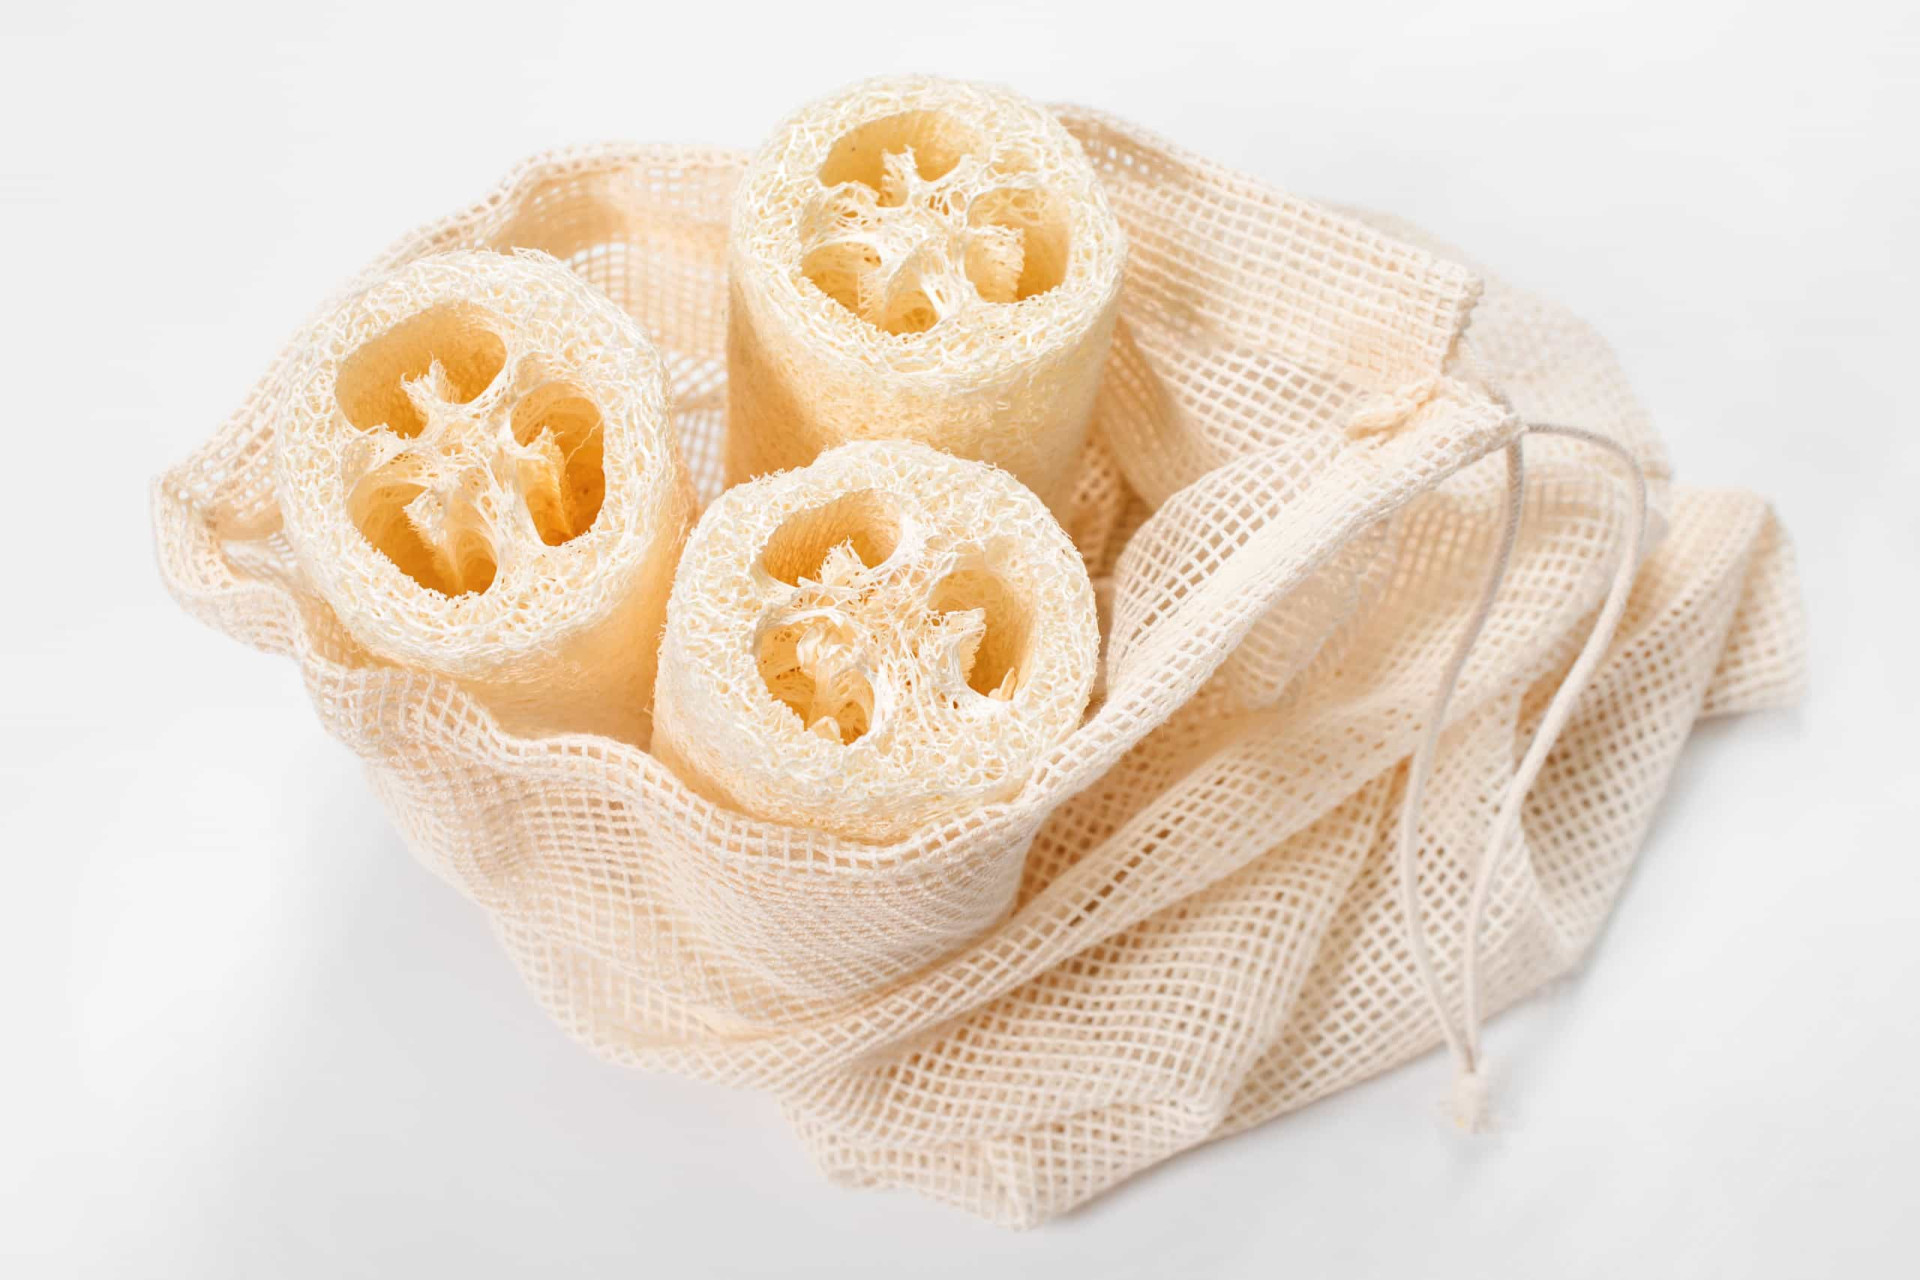 <p><span>After your clay mask, the pores of your skin will be open and ready to be exfoliated. Use a loofah or body scrub to exfoliate your skin all over. </span></p>